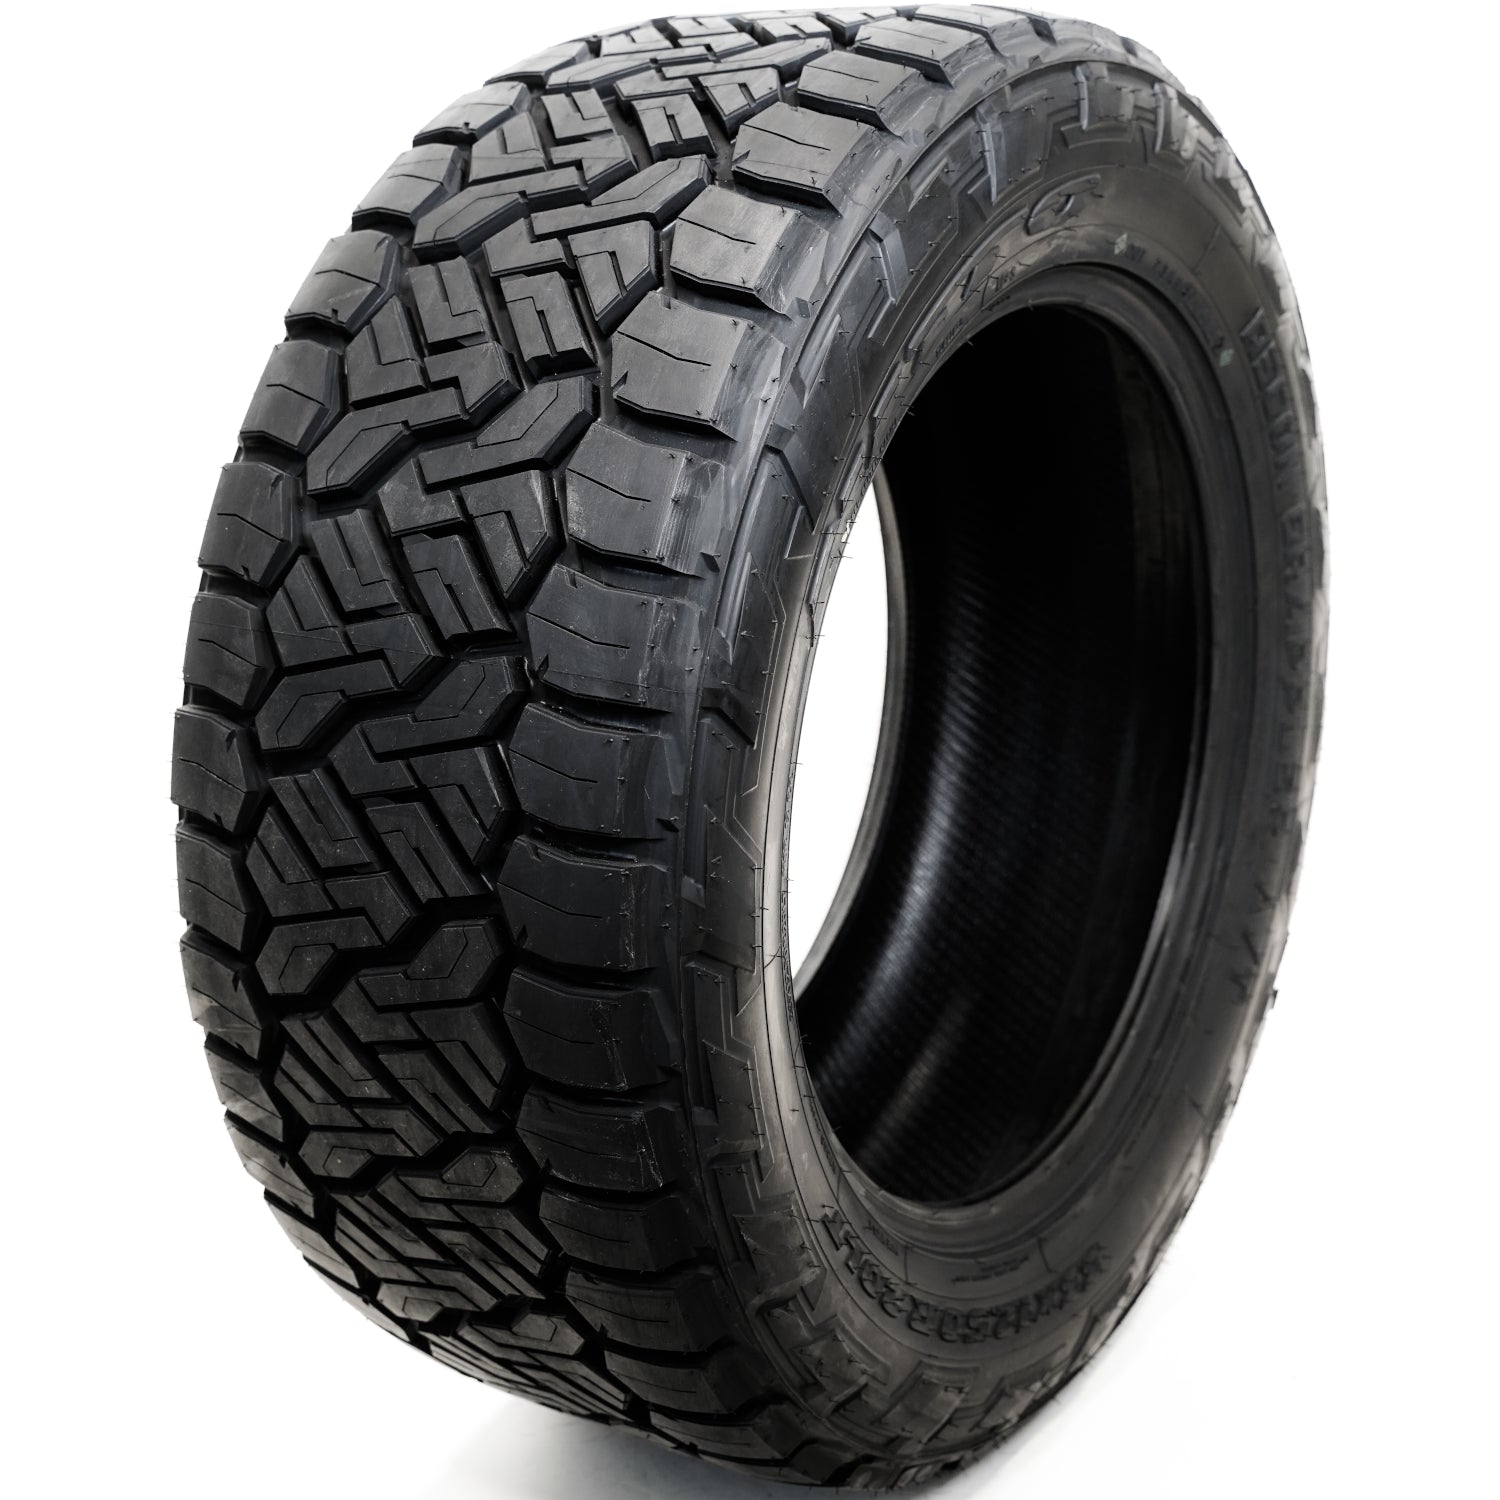 NITTO RECON GRAPPLER A/T LT265/70R17 (31.7X10.4R 17) Tires